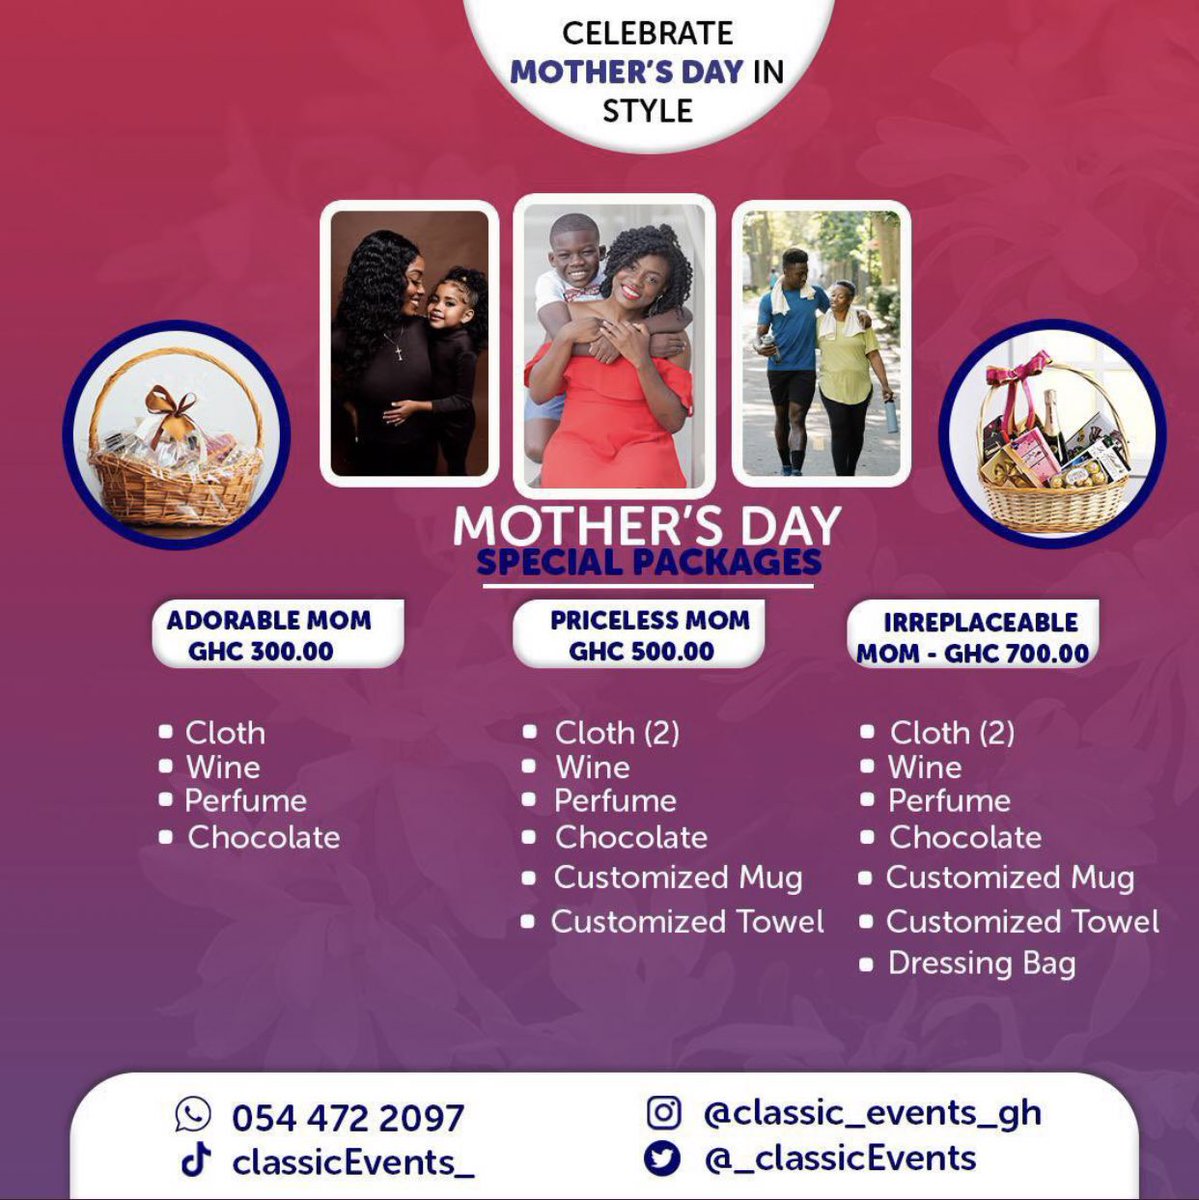 Let’s make mama proud on this coming Mother’s Day by working with @_ClassicEvents